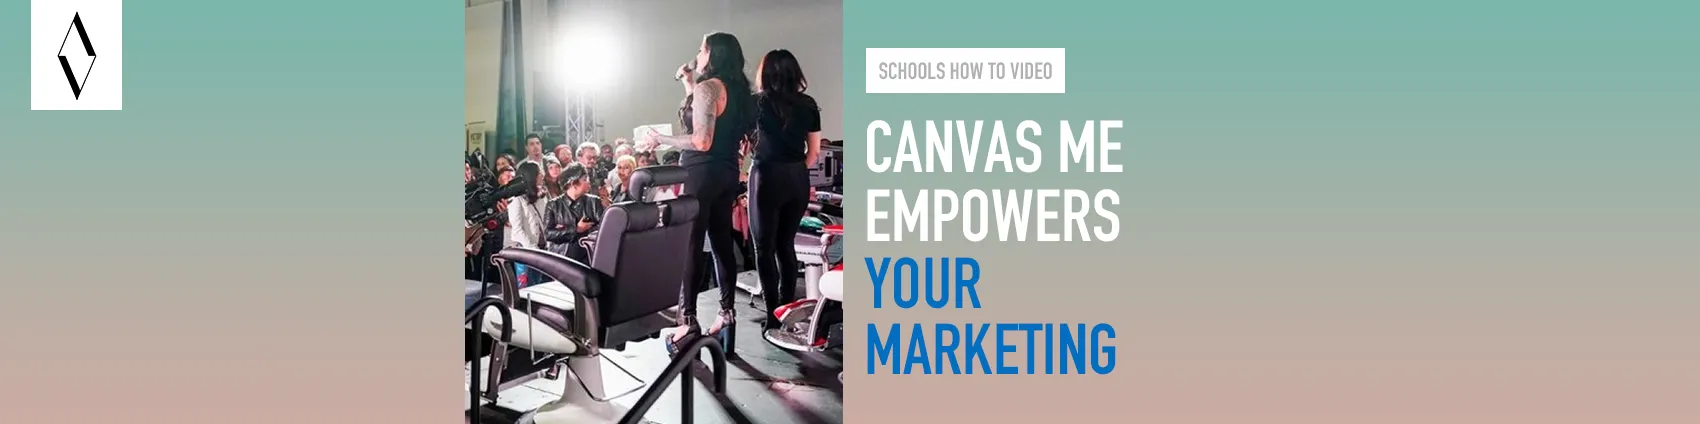 HOW CANVAS ME EMPOWERS YOUR SCHOOL: For Marketing